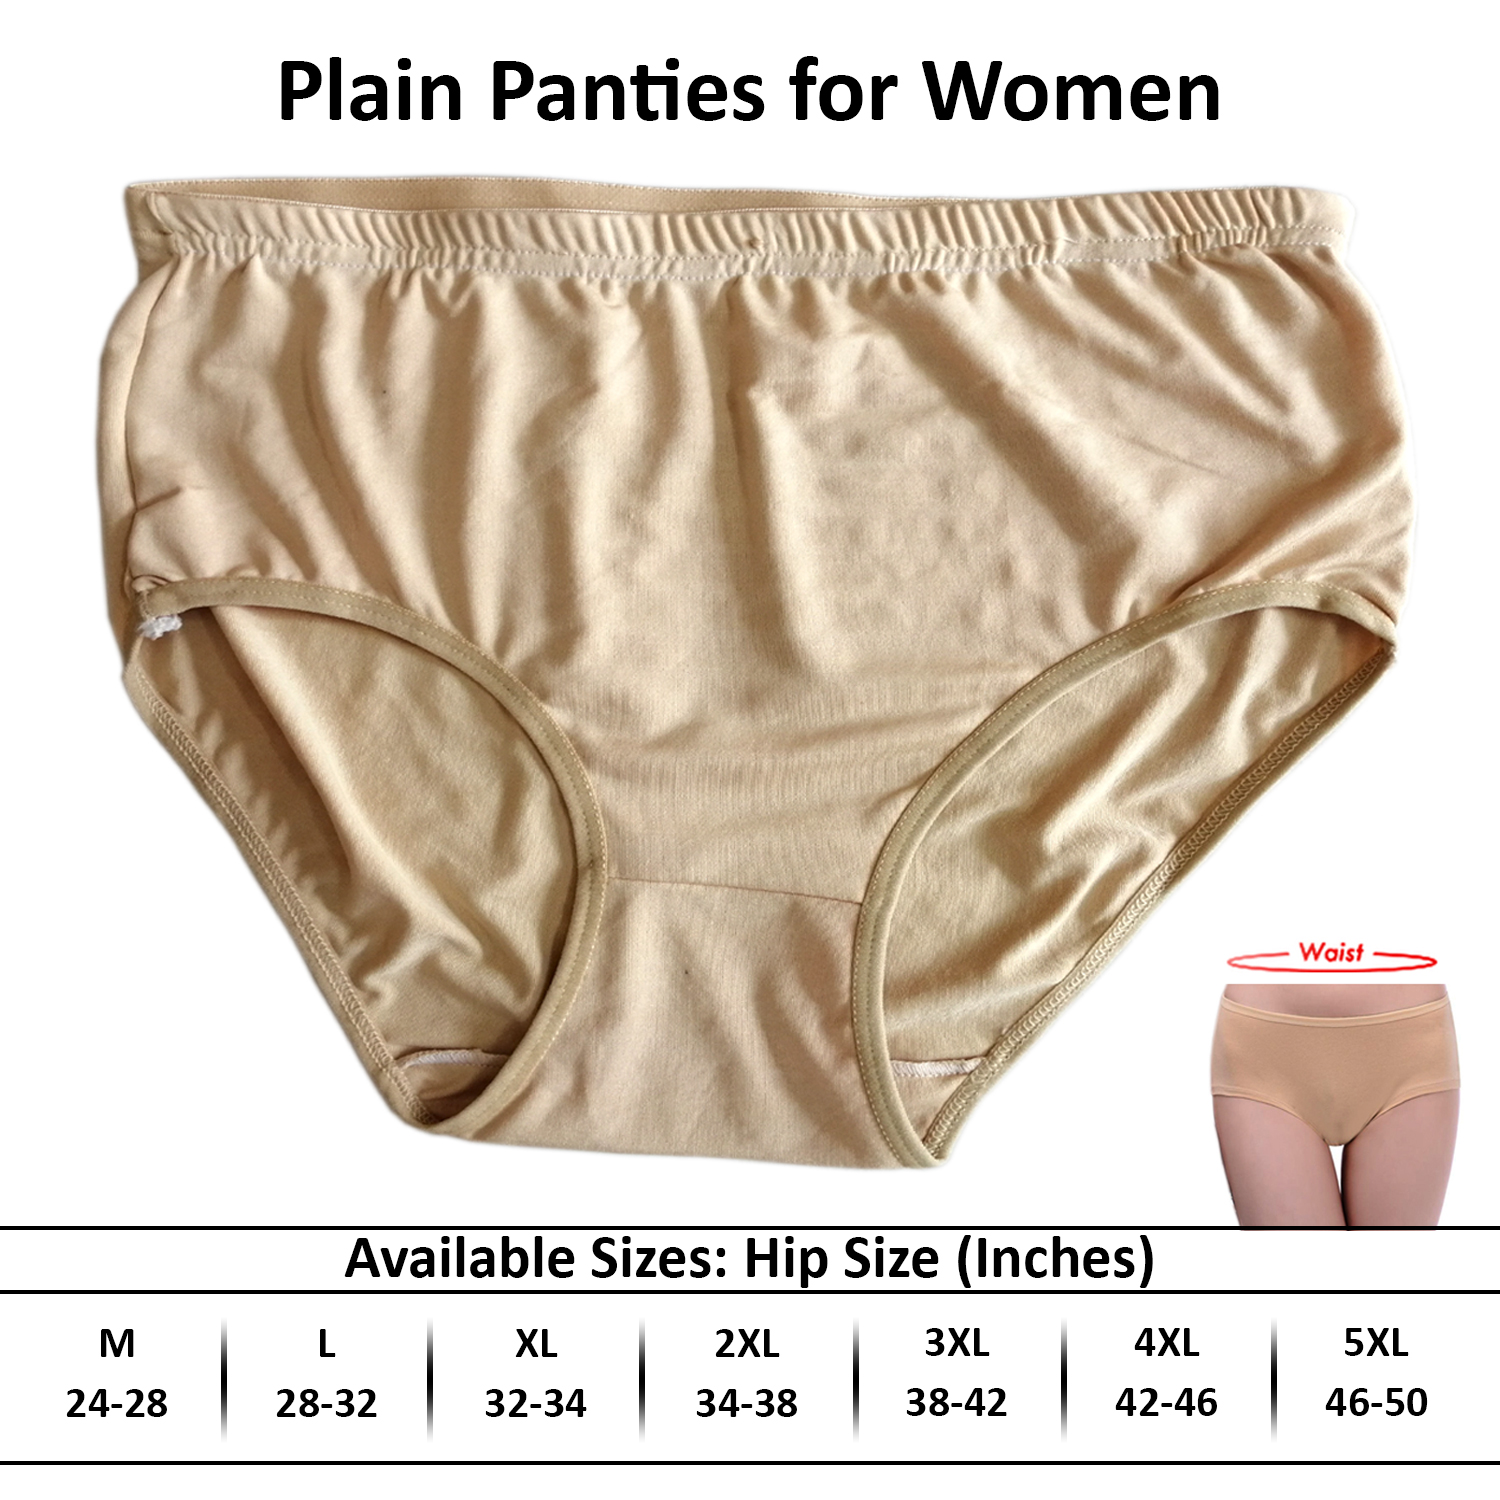 Cotton Made Seamless Panty For Women's Underwear Panties for Ladies Periods  and Casual Wear Under Garments for Girls and Women M to 4XL Sizes